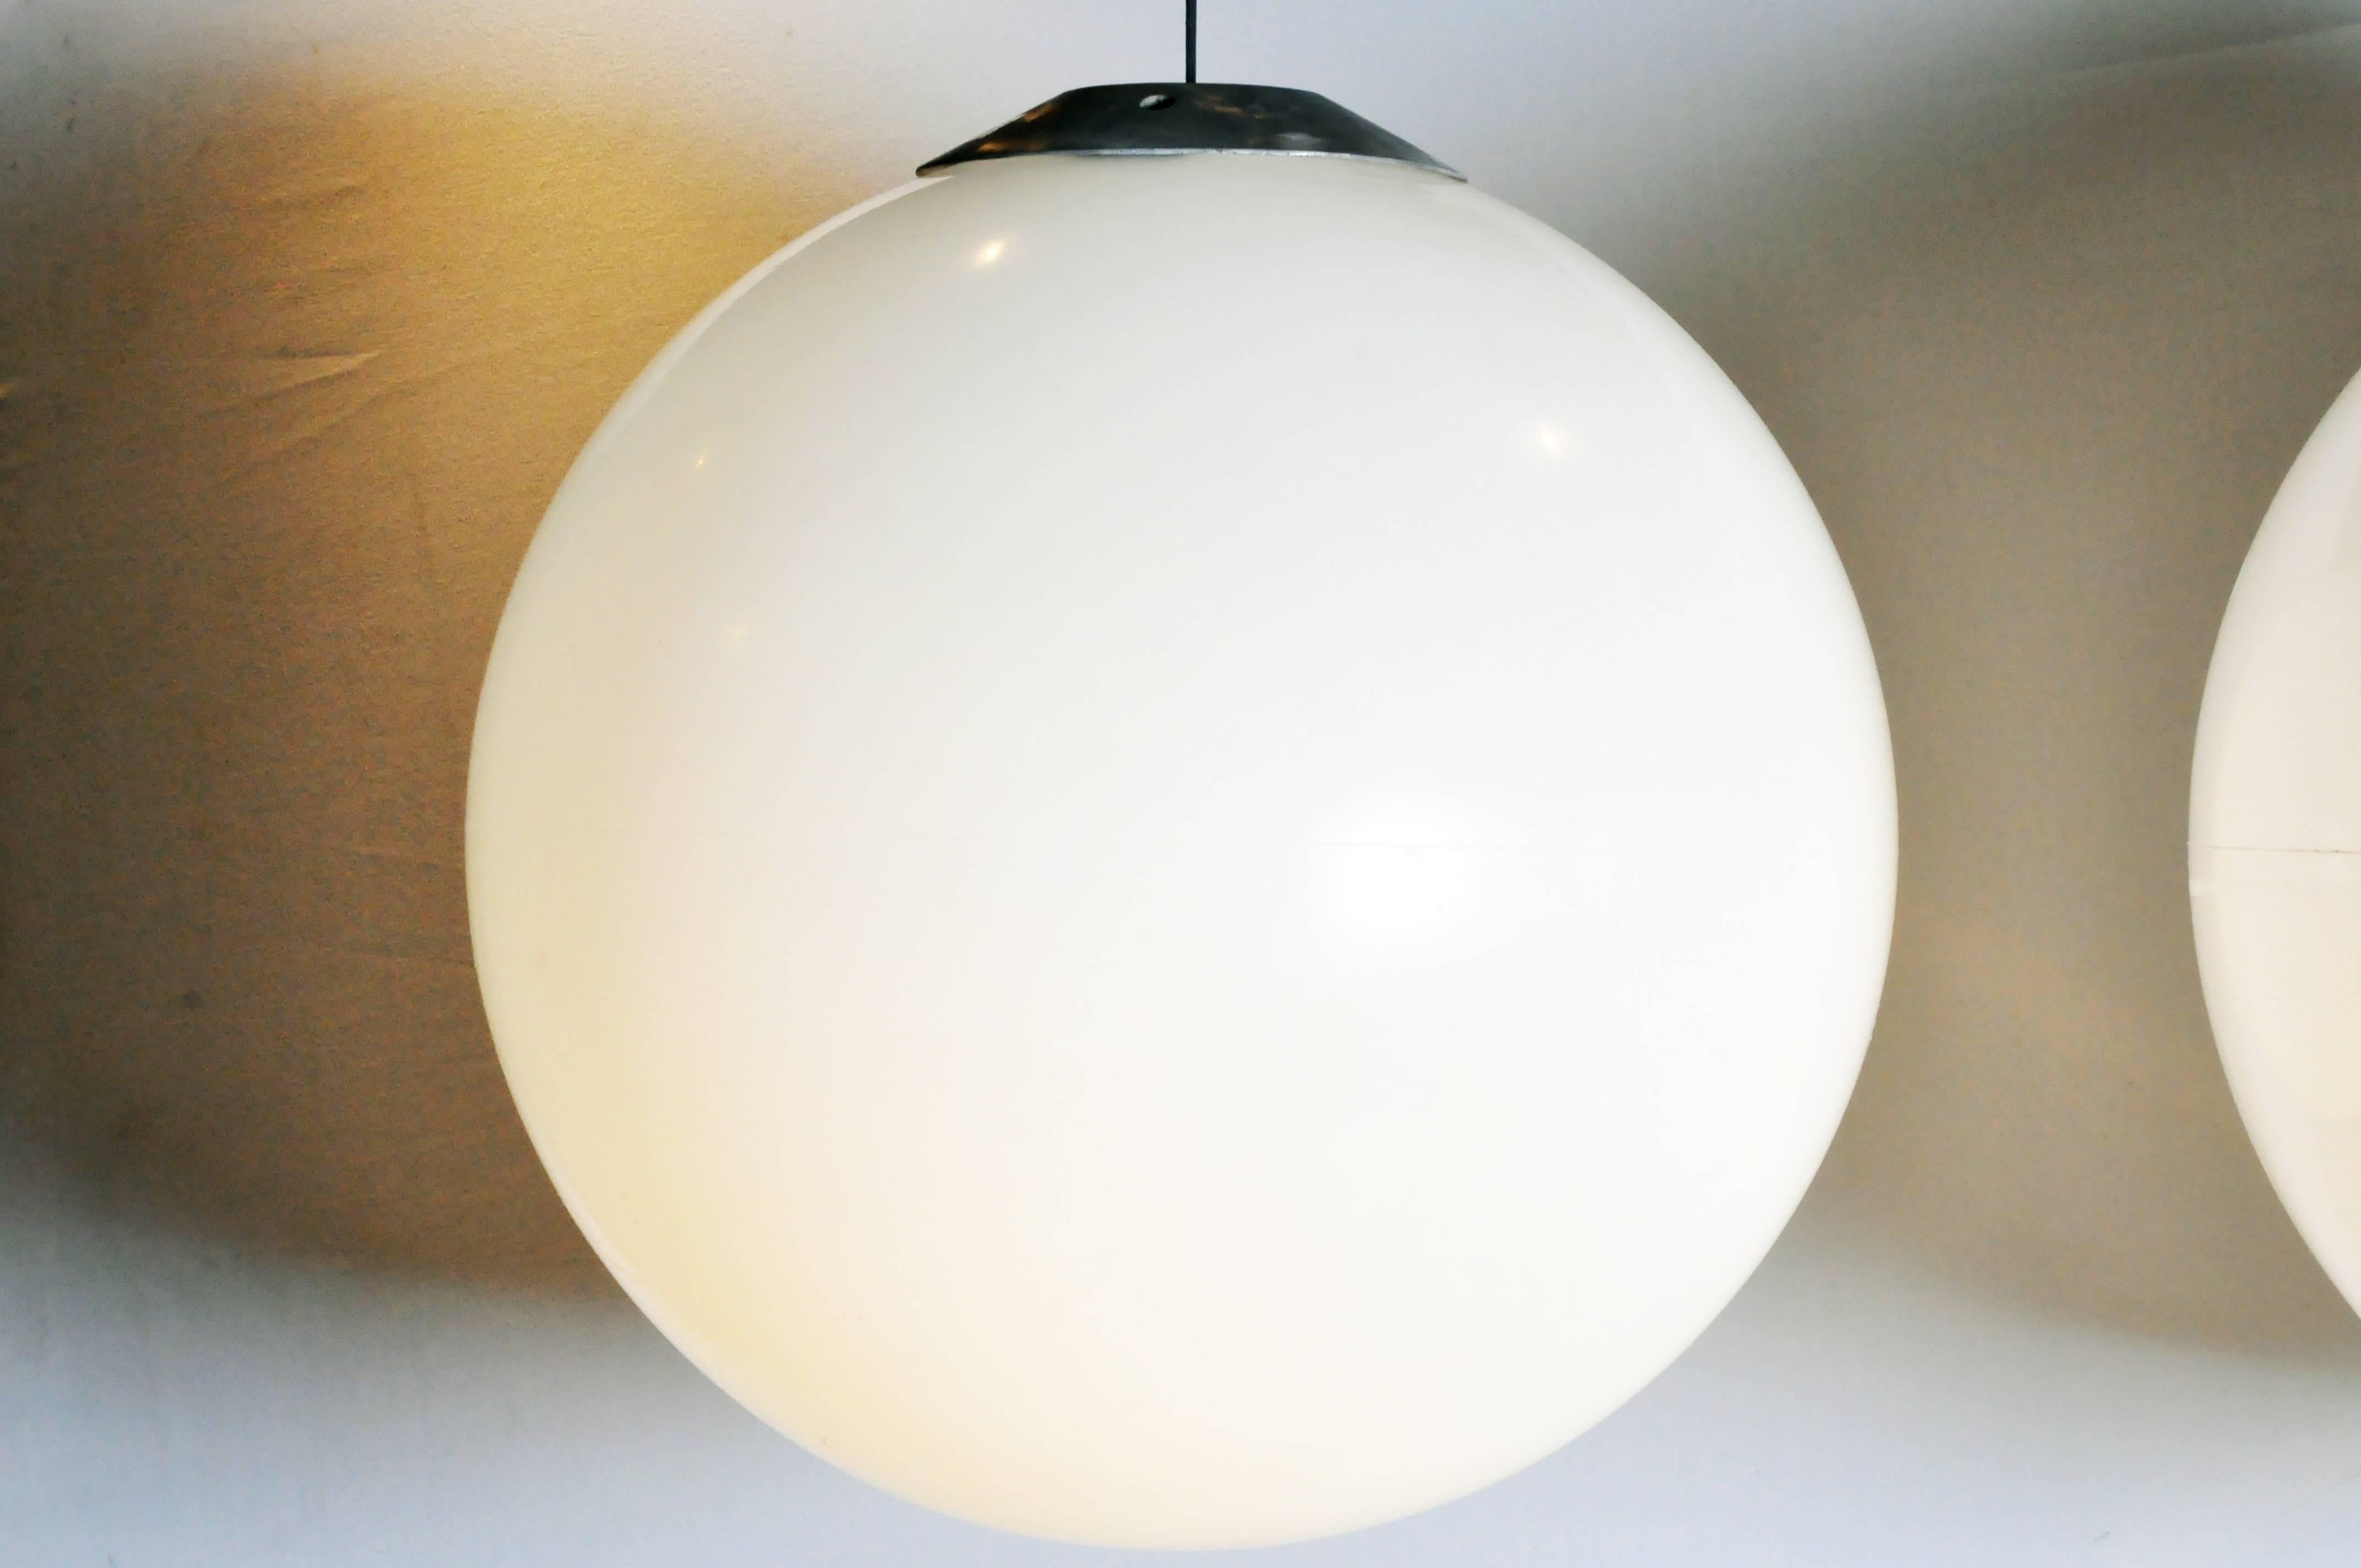 These large, opaque, resin globes hail from France and are suspended from black electrical cords.